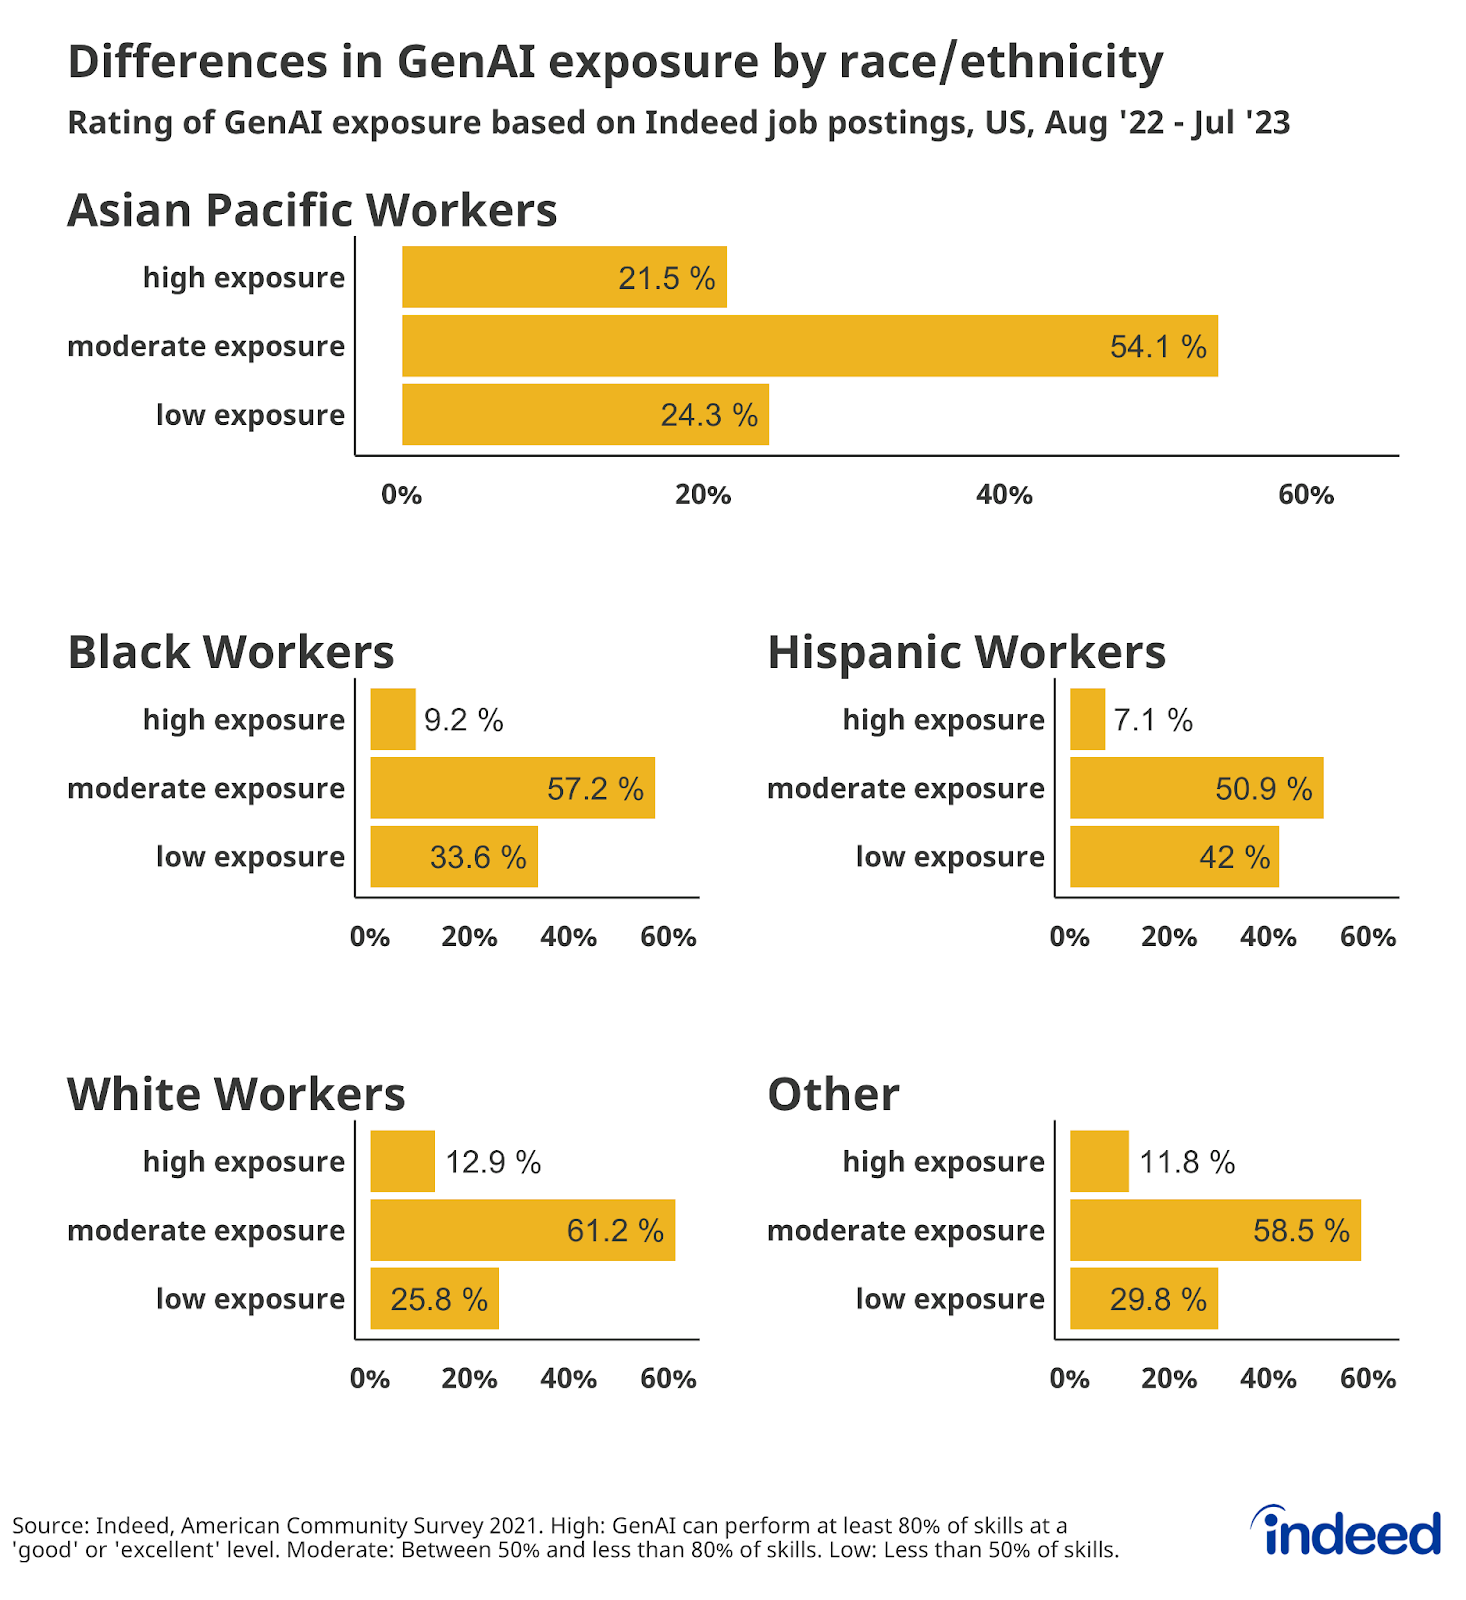 A series of three bar graphs titled "Differences in GenAI exposure by race/ethnicity," shows the rating of GenAI exposure (by high, moderate, and low exposure) for Asian Pacific workers, Black workers, Hispanic workers, white workers, and Other workers.